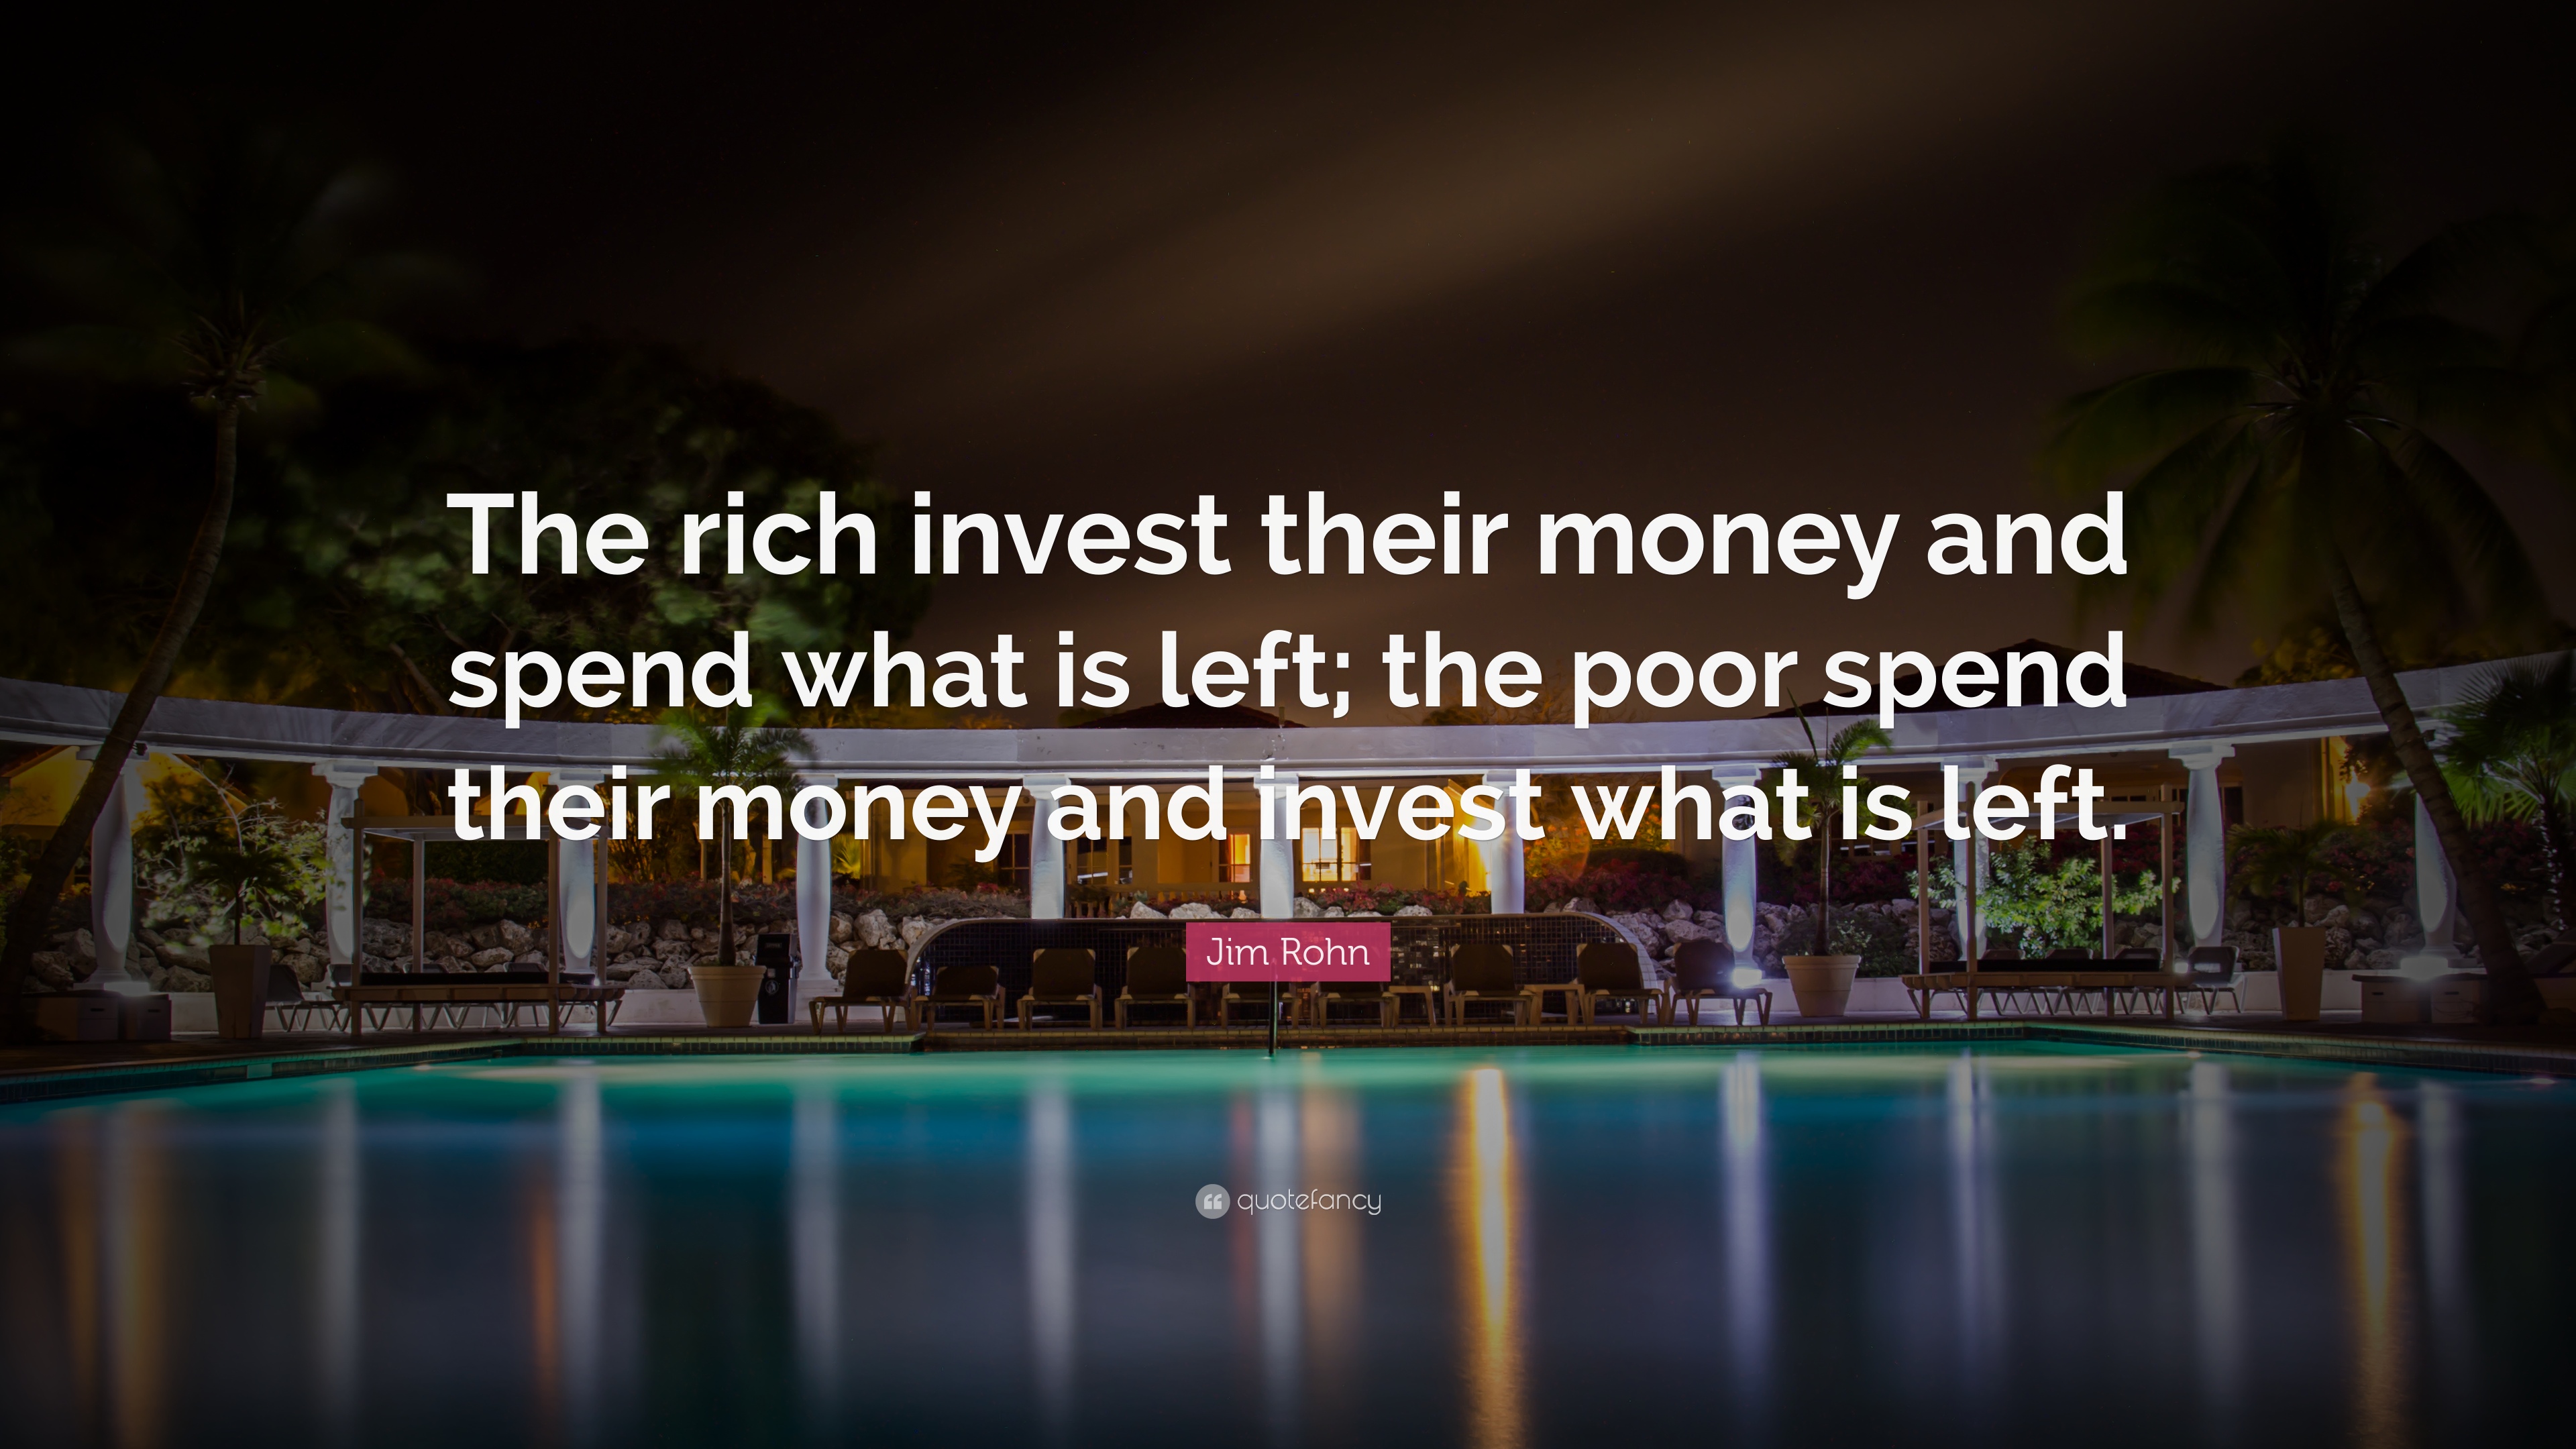 97190-Jim-Rohn-Quote-The-rich-invest-their-money-and-spend-what-is-left